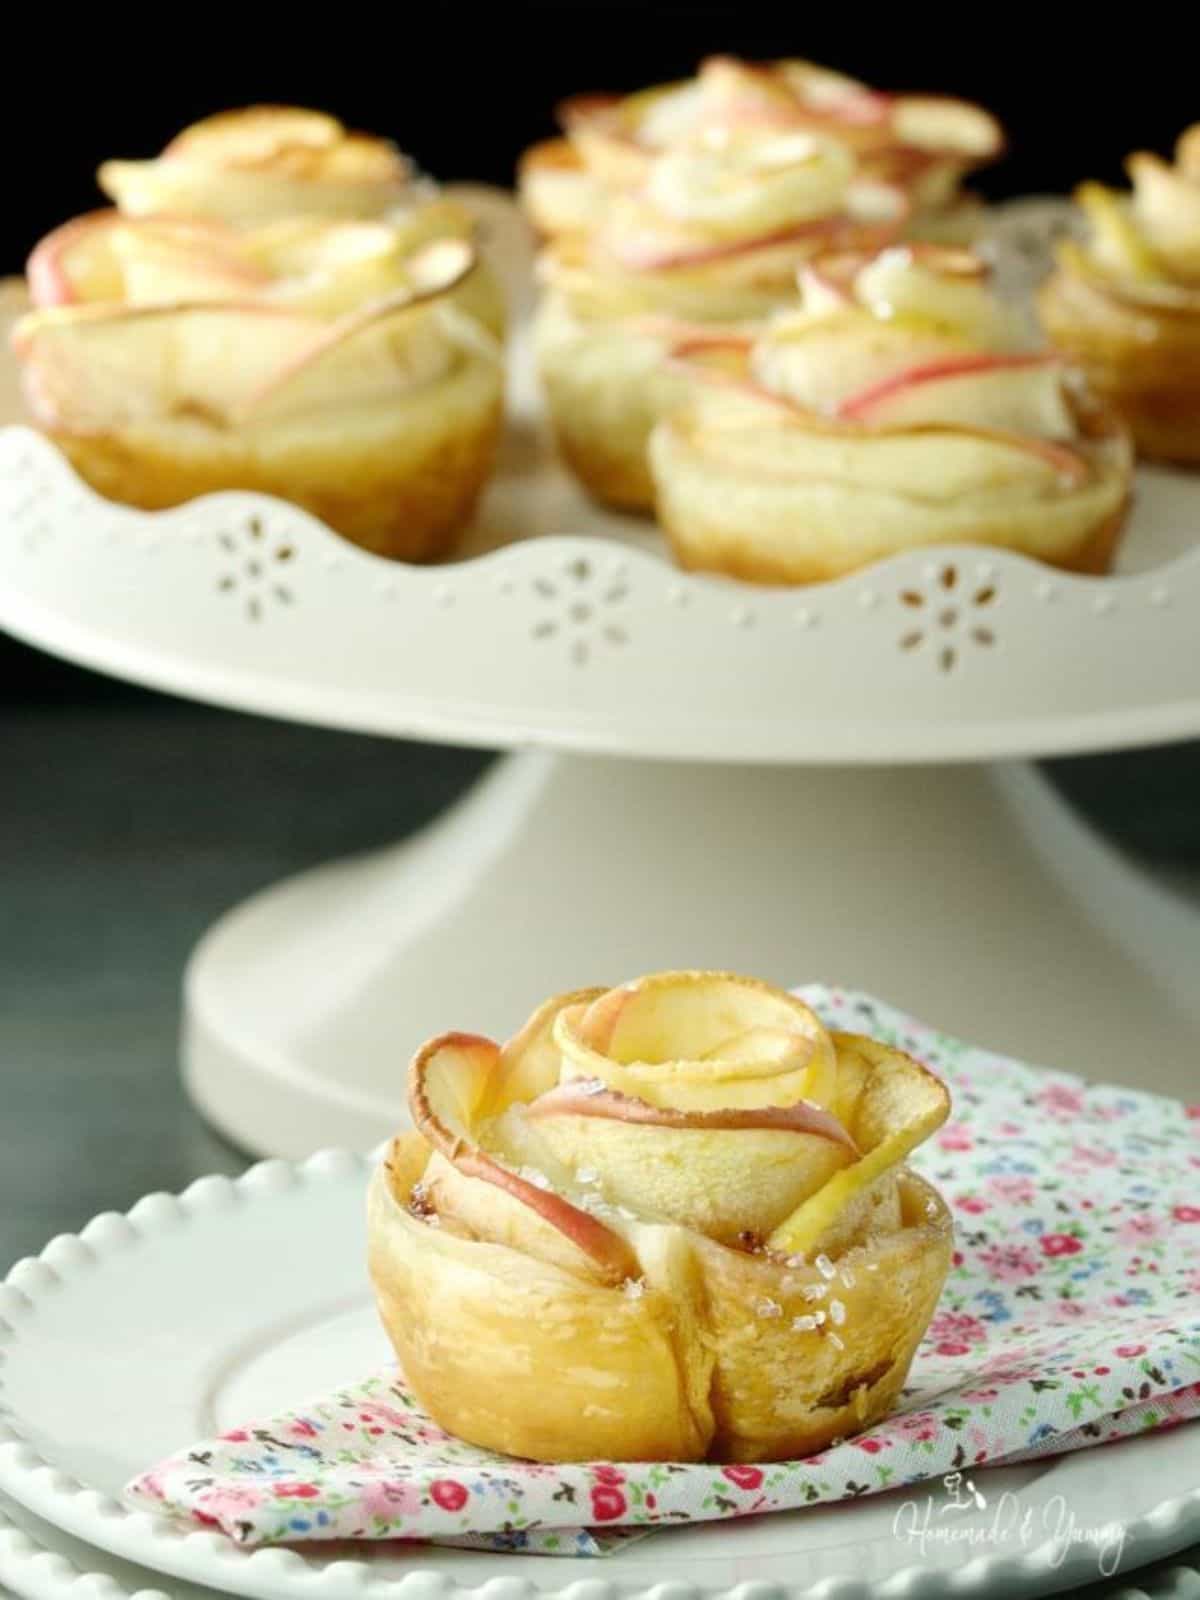 Beautiful Apple Slices formed into a rose then baked atop a Puff Pastry Shell